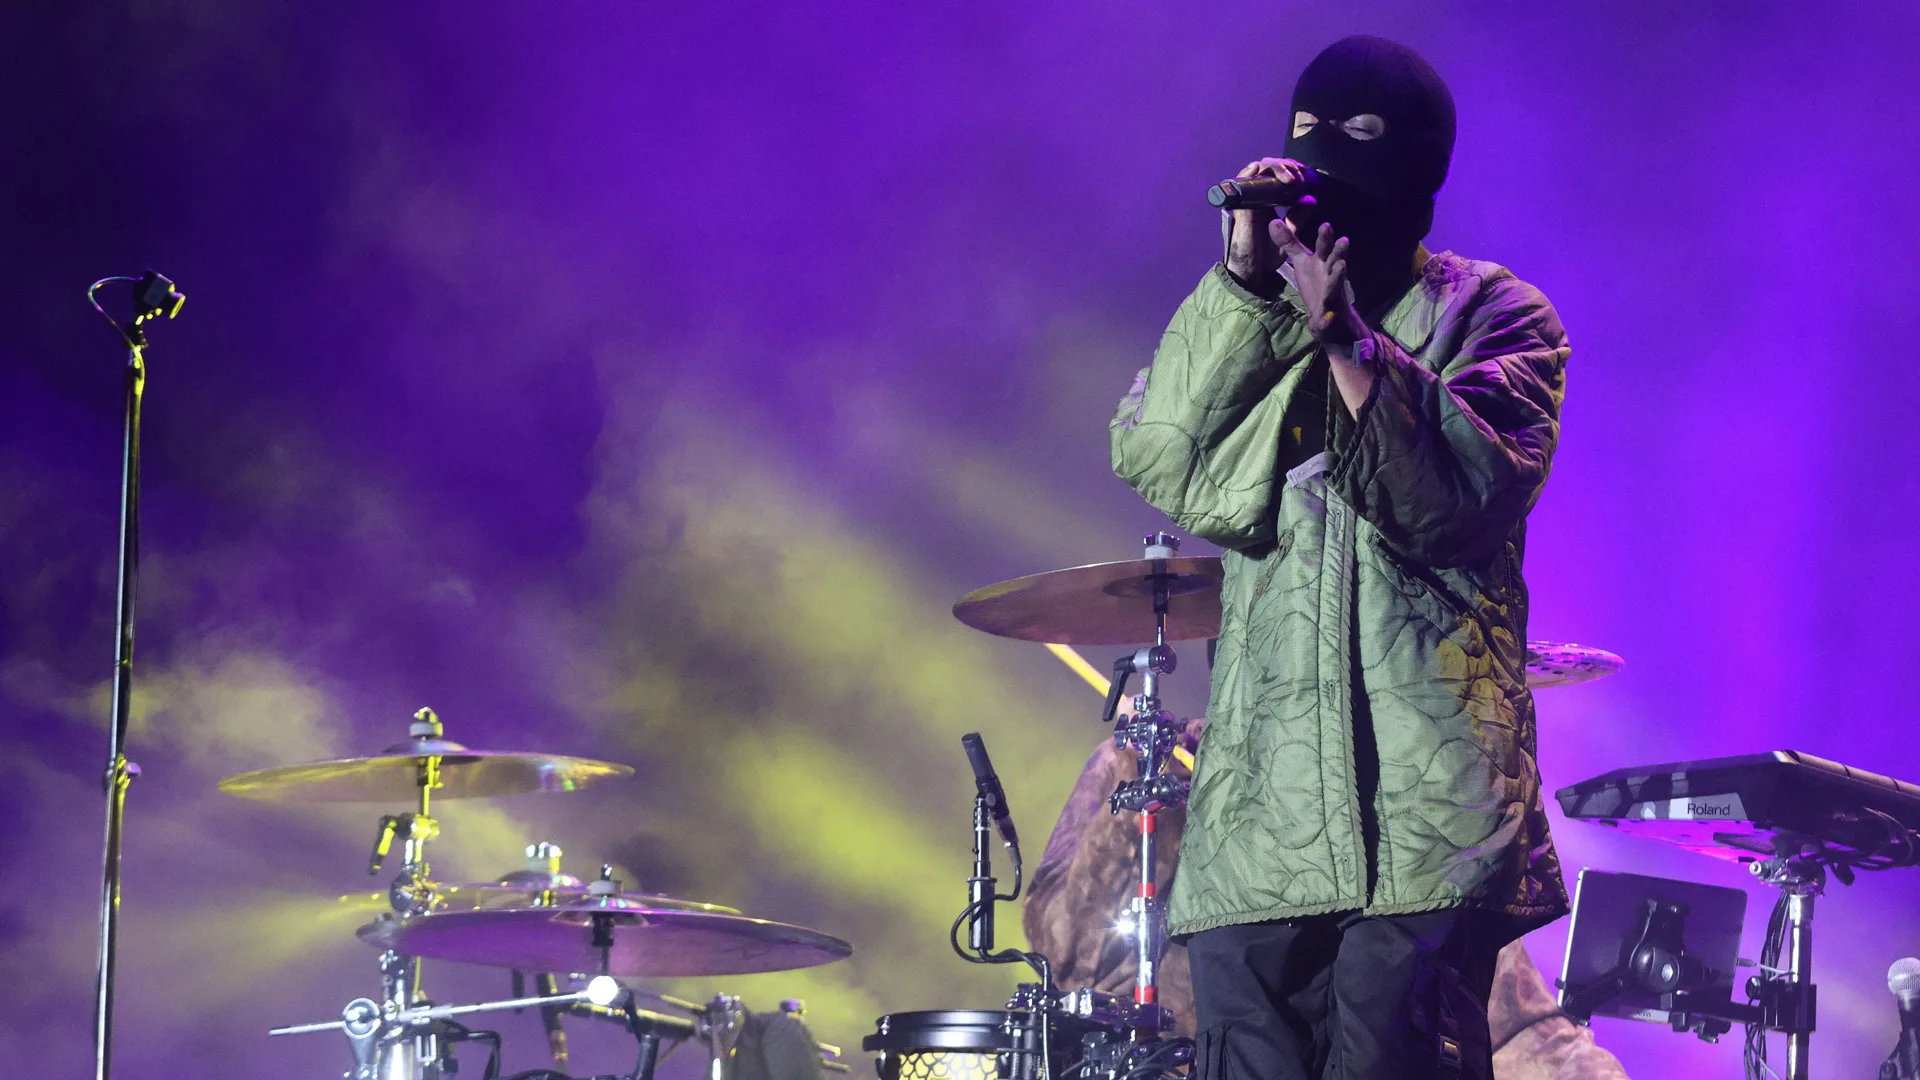 A photograph of the singer of Twenty One Pilots in a black balaclava and green coat on stage with purple and yellow lighting